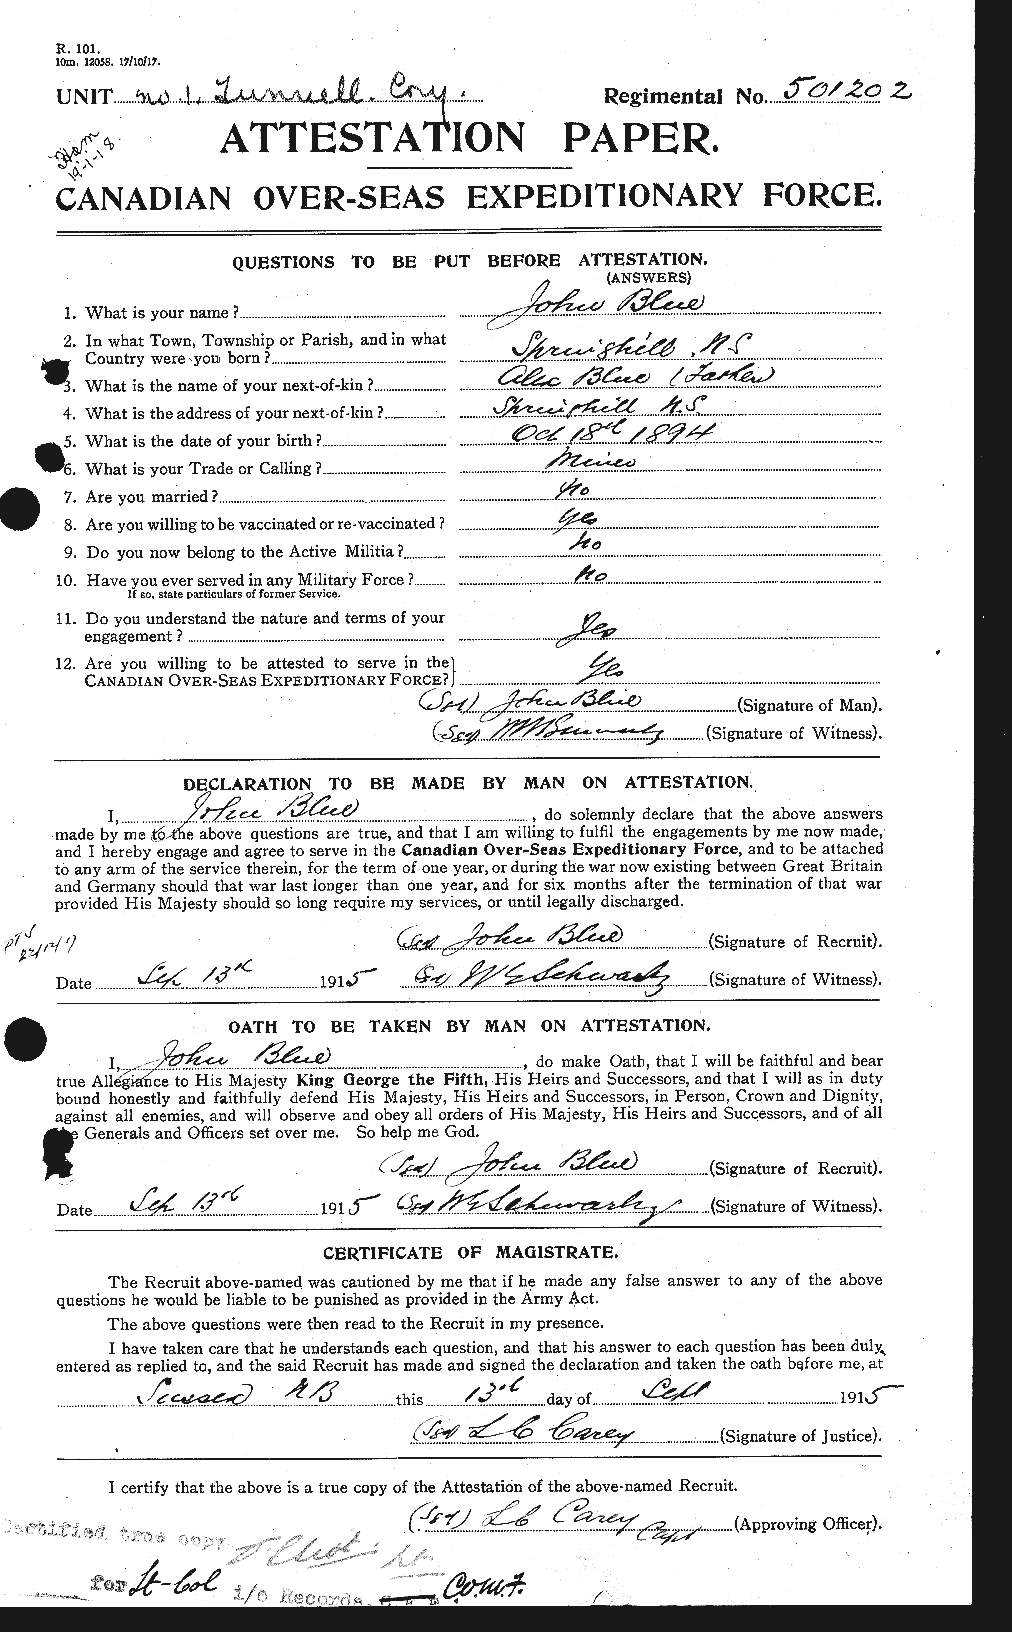 Personnel Records of the First World War - CEF 247142a